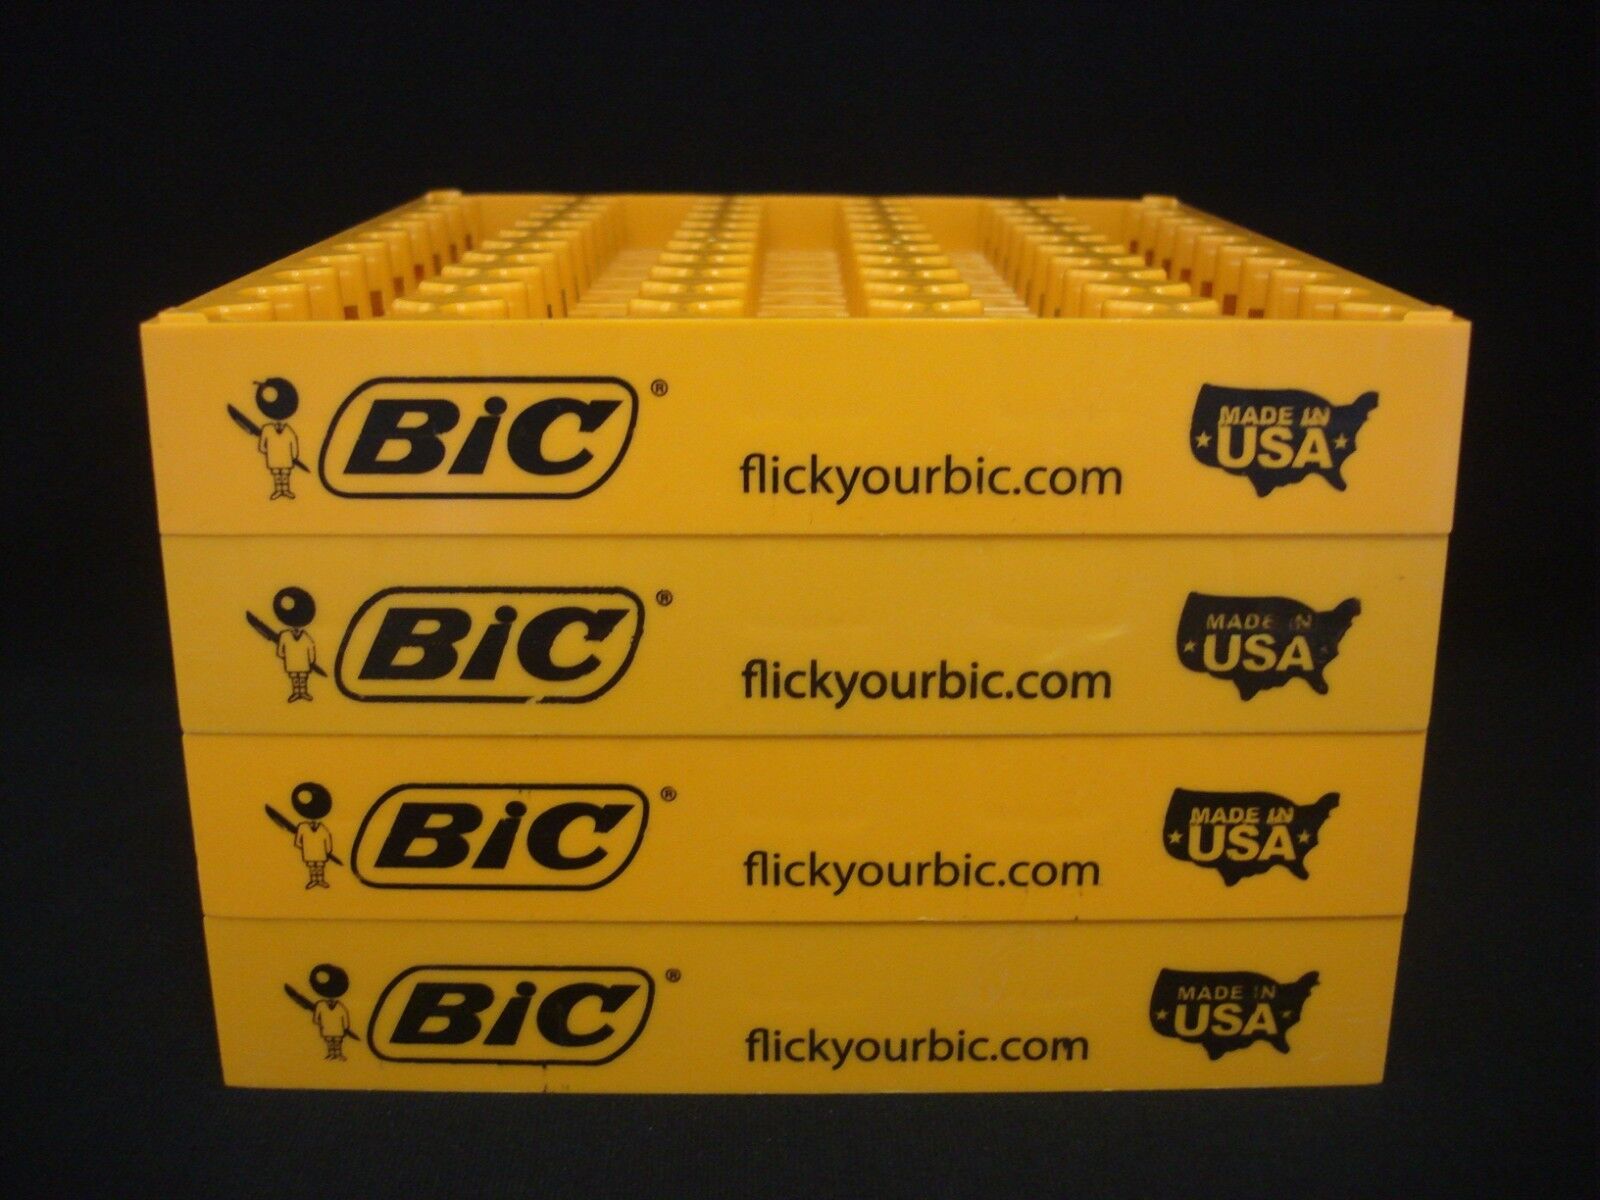 4 Bic Empty Display Tray For 50 Regular size Lighters Counter Top Rack (Used)